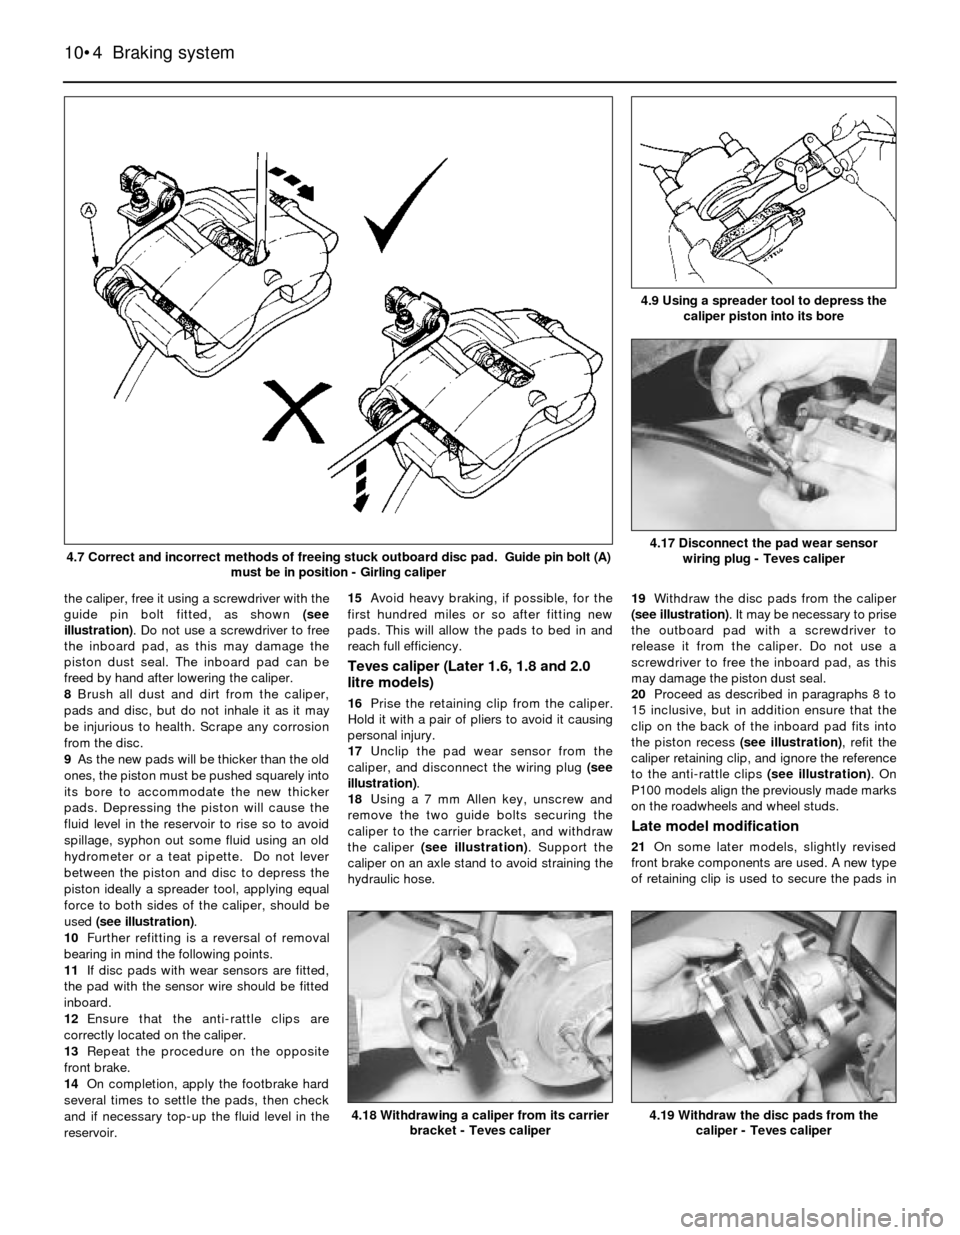 FORD SIERRA 1982 1.G Braking System Workshop Manual the caliper, free it using a screwdriver with the
guide pin bolt fitted, as shown (see
illustration). Do not use a screwdriver to free
the inboard pad, as this may damage the
piston dust seal. The inb